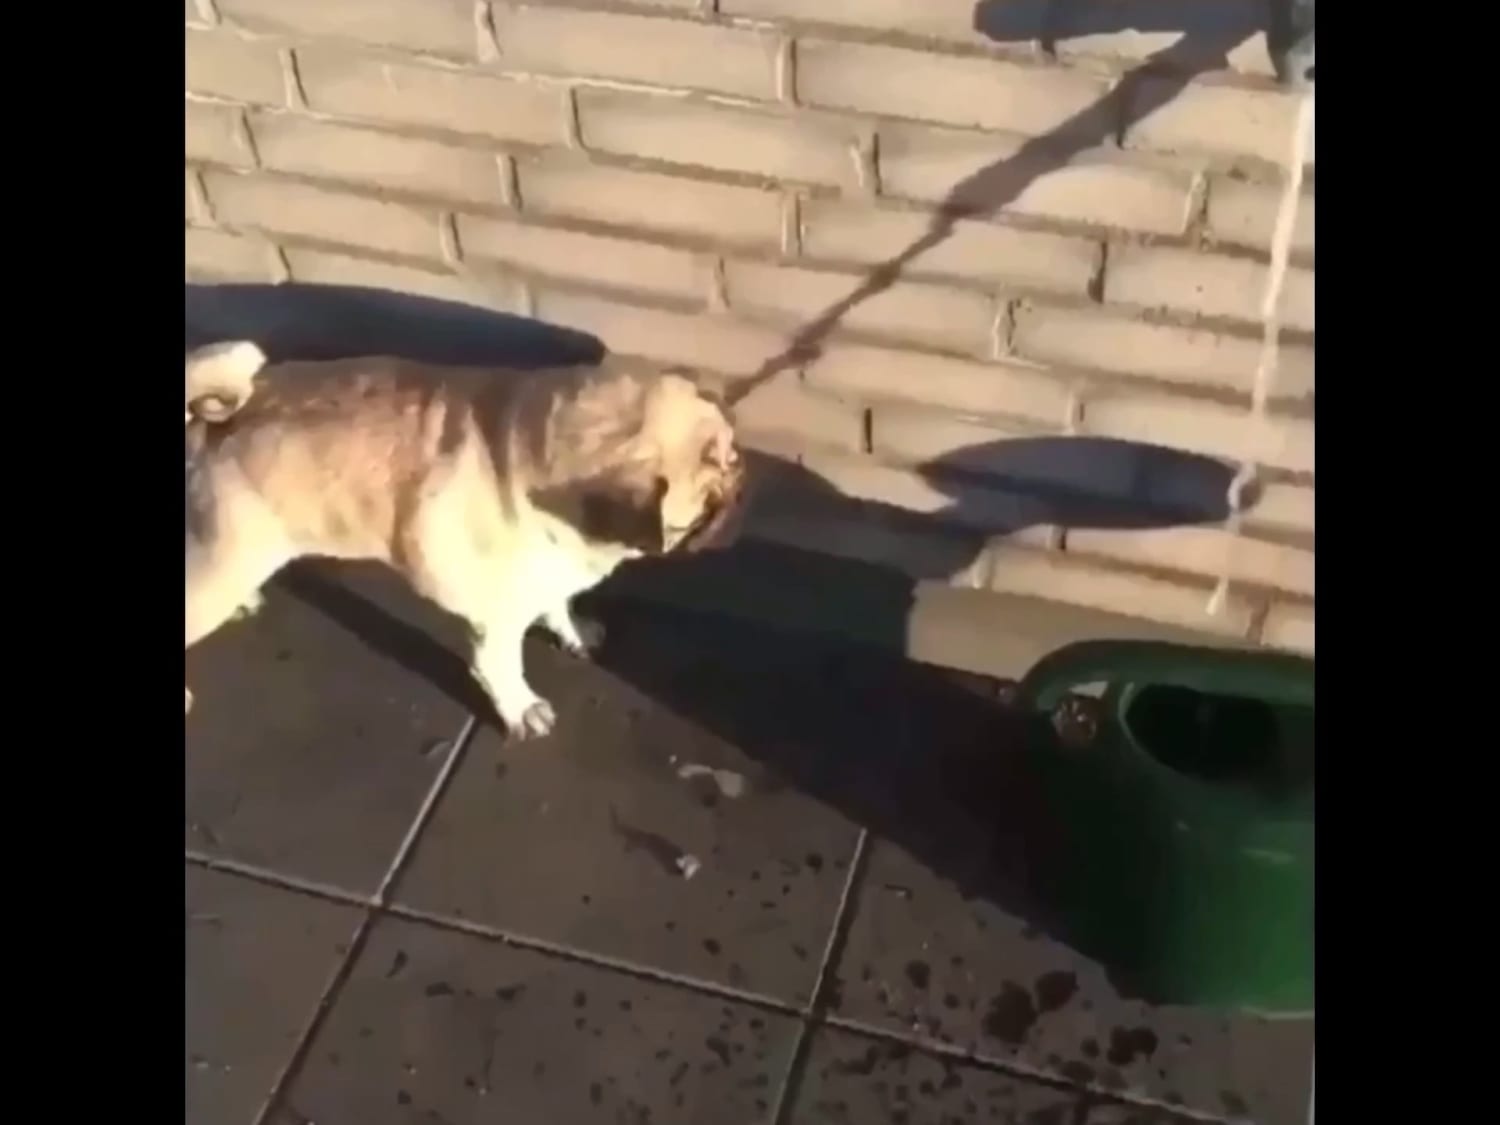 to drink the water.